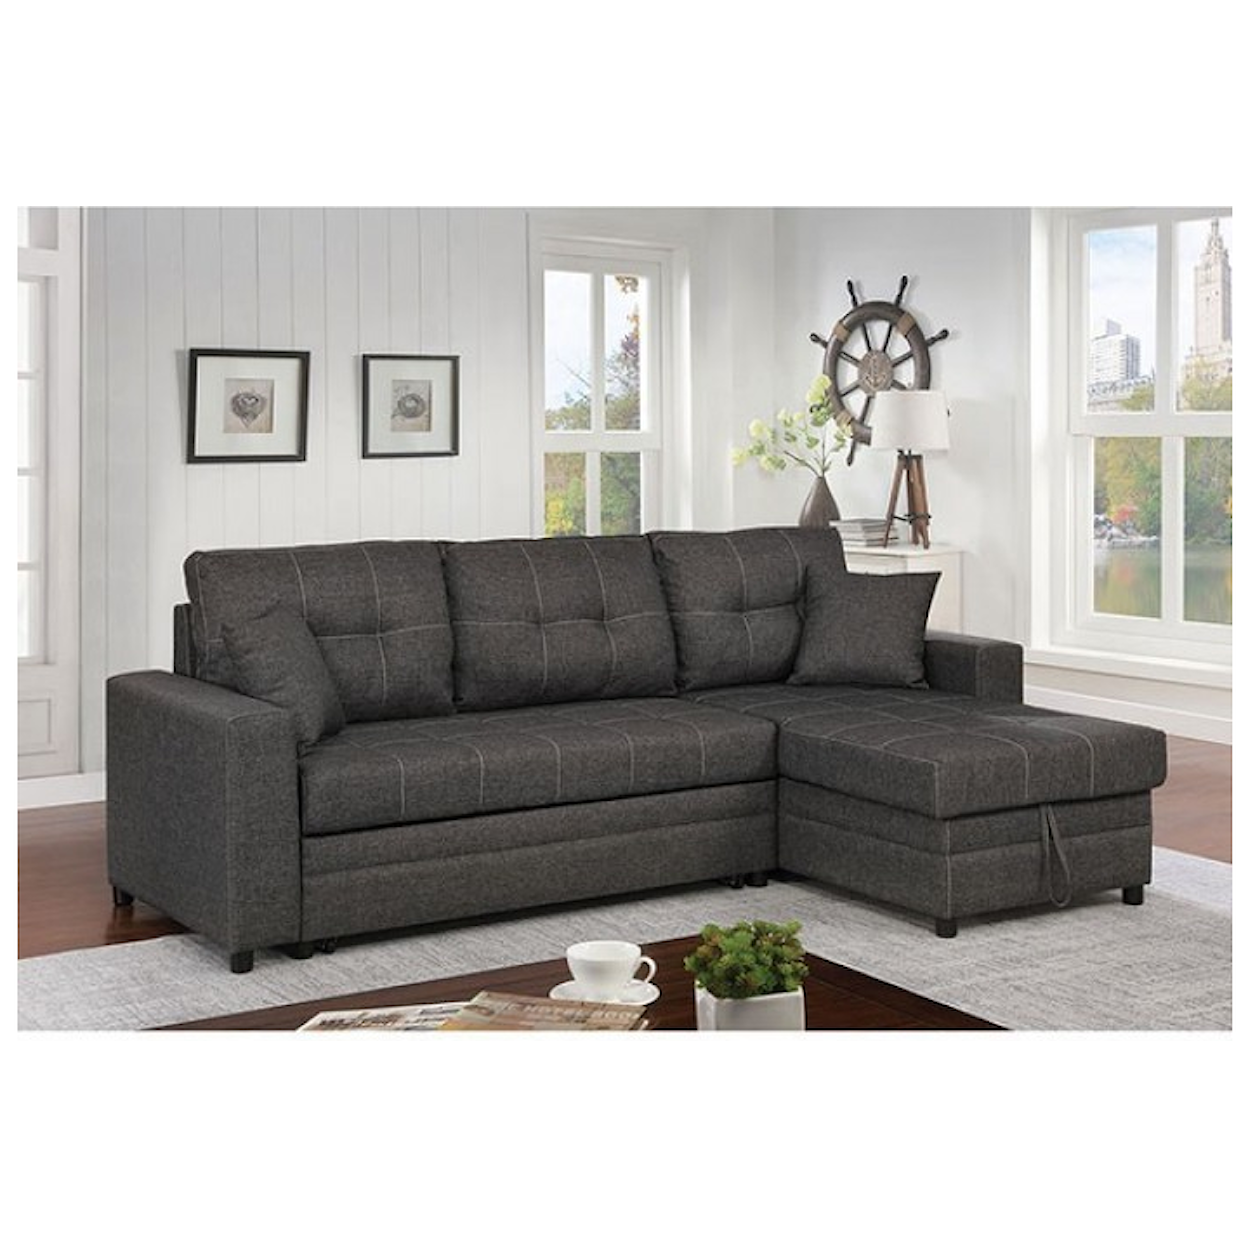 Furniture of America Vide Sectional Sofabed Chaise